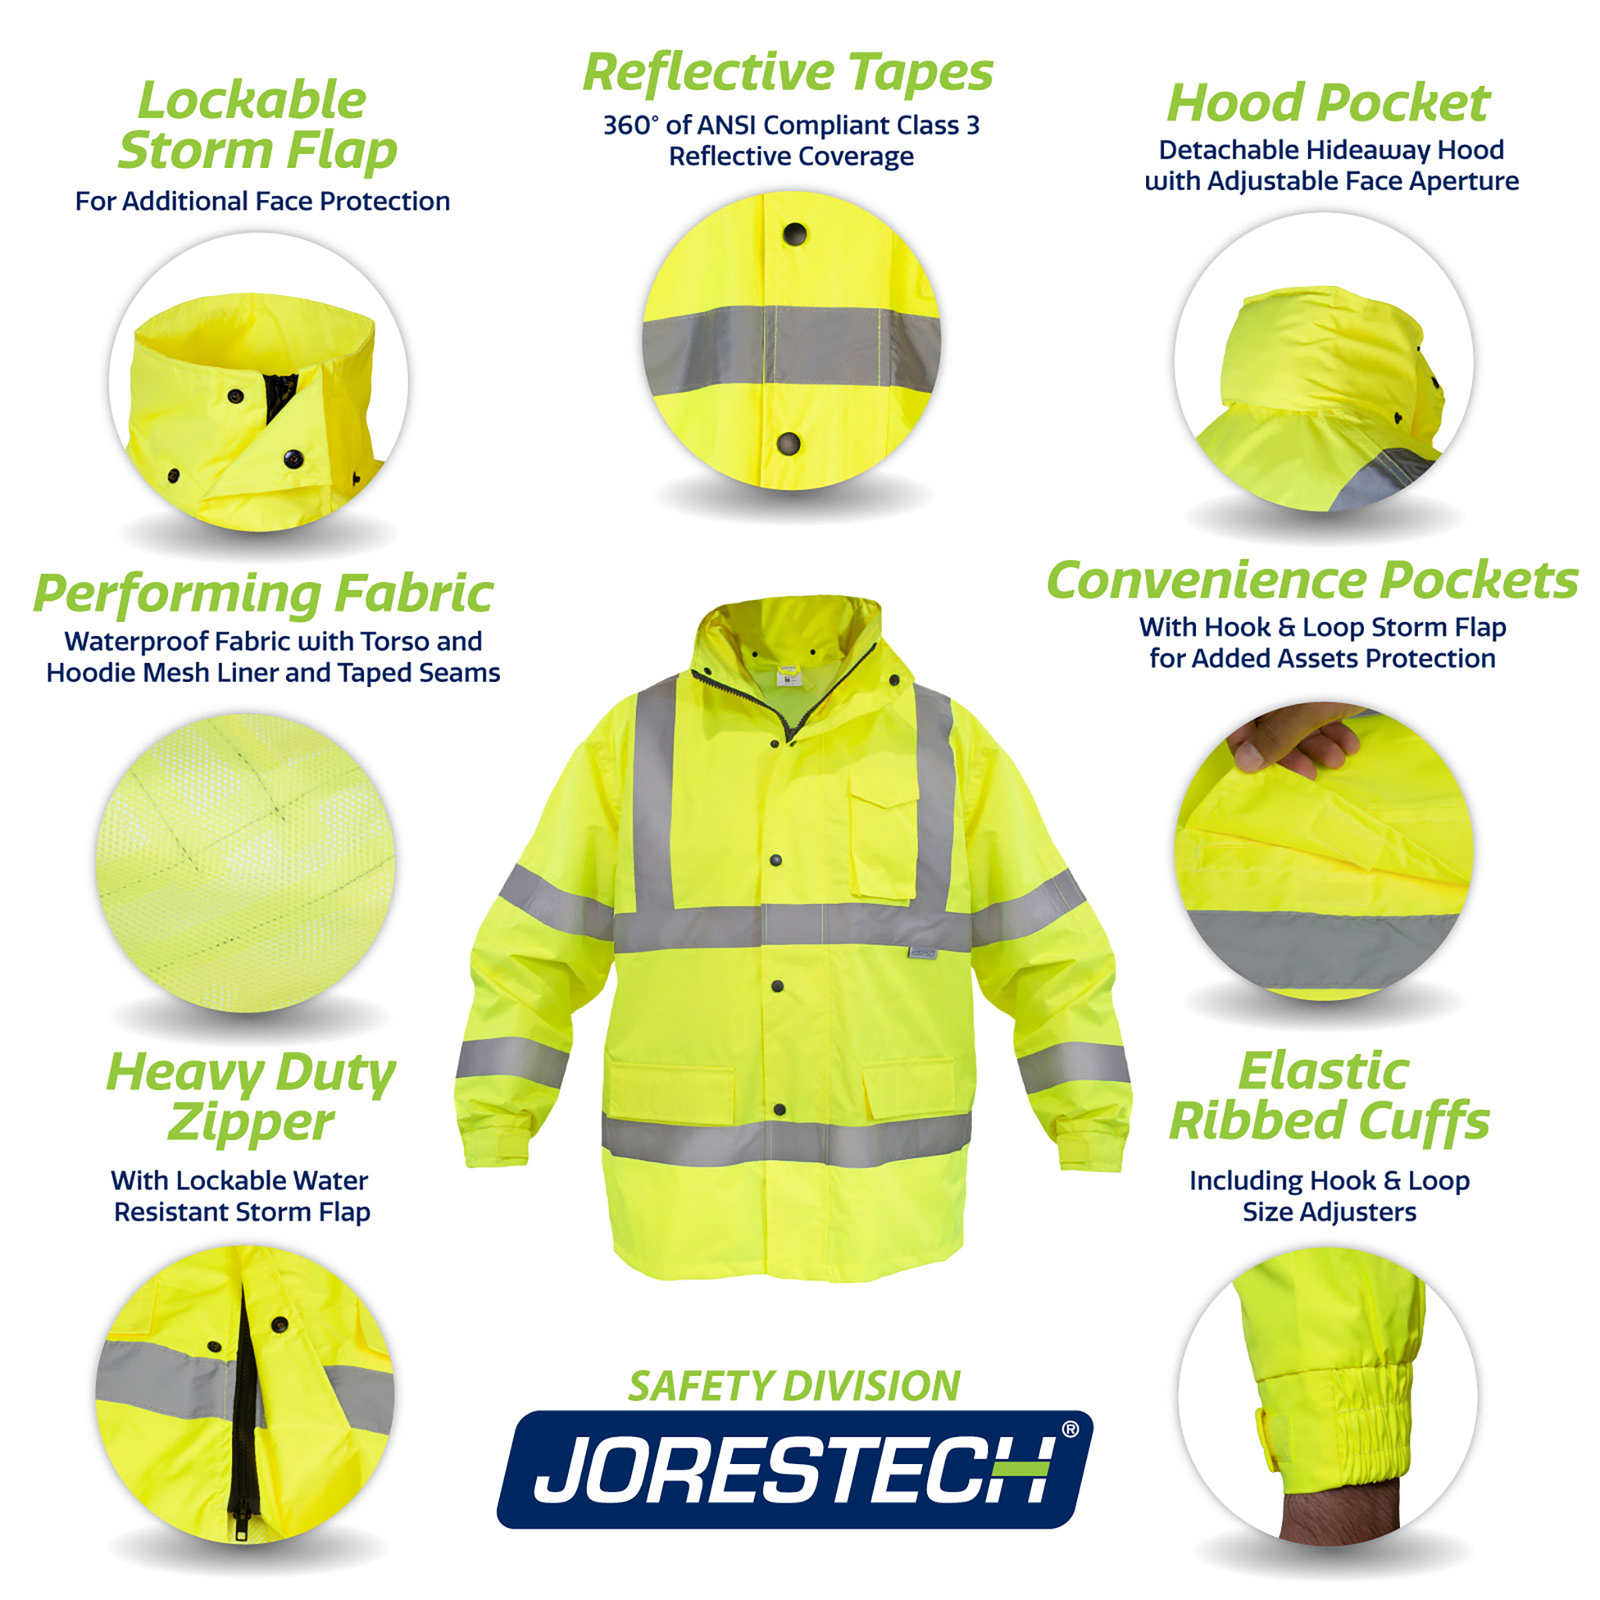 Image of the yellow/lime rain jacket pus 7 call outs. Call outs read: Lockable storm flap for face protection. Reflective tapes ANSI compliant class 3. Hood pocket detachable and hide away hood. Performing fabric, waterproof, mesh liner and taped seams. Multiple convenience pockets. Heavy duty zipper with additional storm flap. Elastic ribbed cuffs with hook and loop strap.